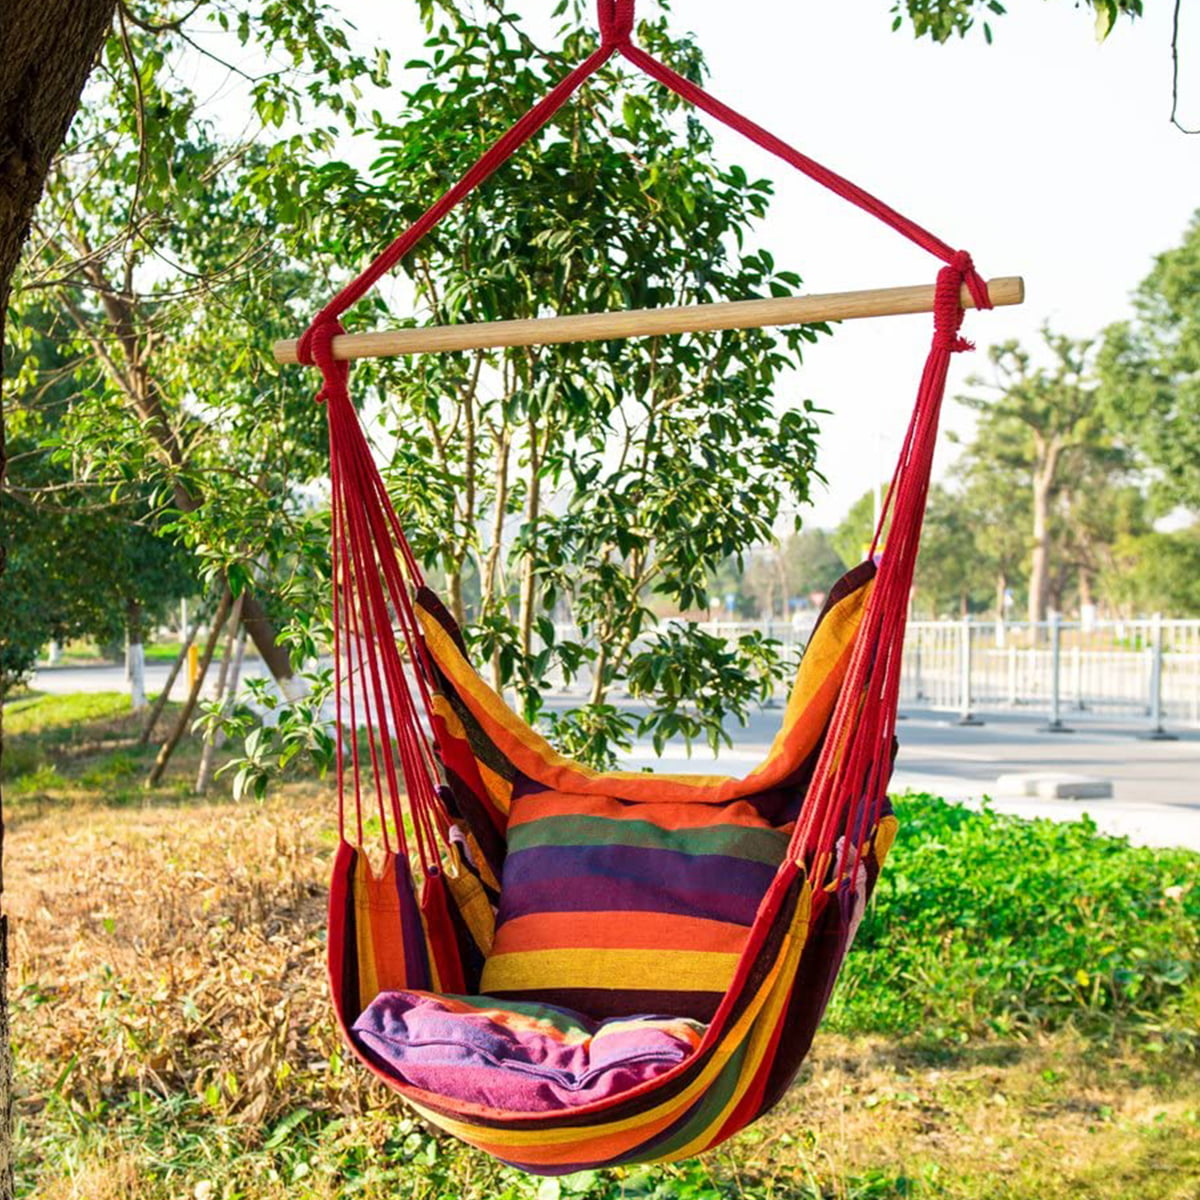 Cushions Hooks & Tree Strap Porch or Backyard Perfect Swing Chair for Patio COMFORTO Hammock Chair Includes Transport Bag Outdoor Hanging Chair with 2 Inside Pockets Max Weight of 440 lbs 